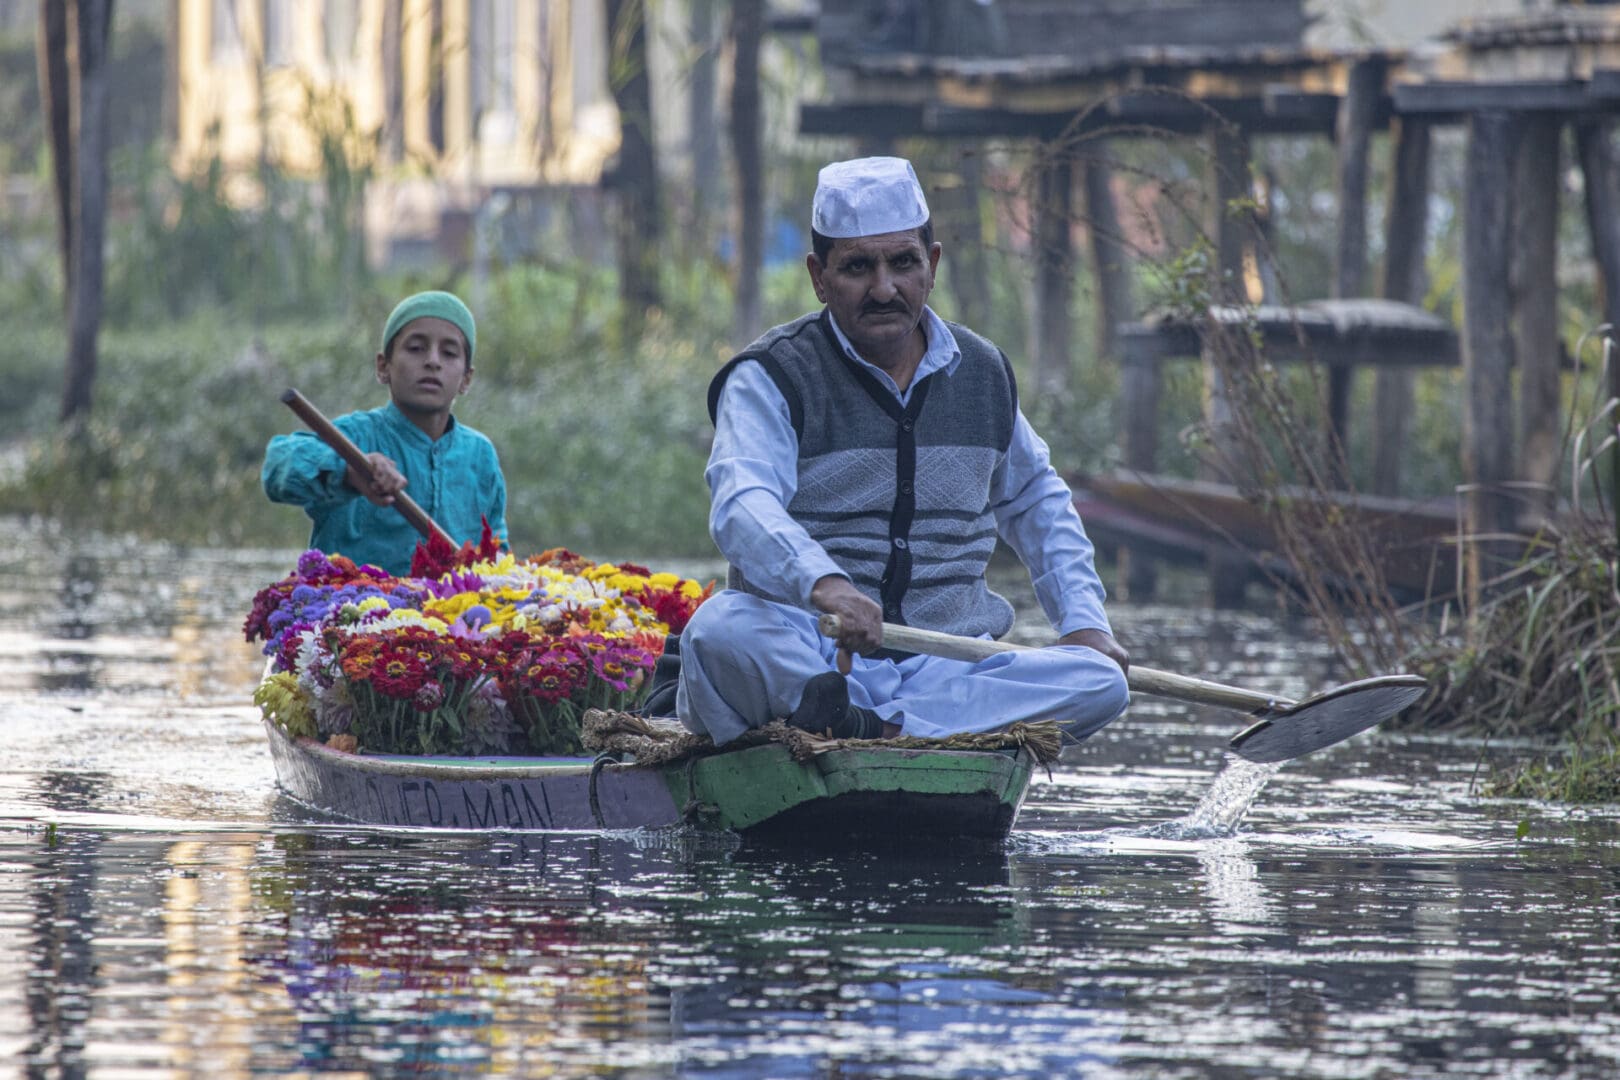 A man and a woman in a boat with flowers.